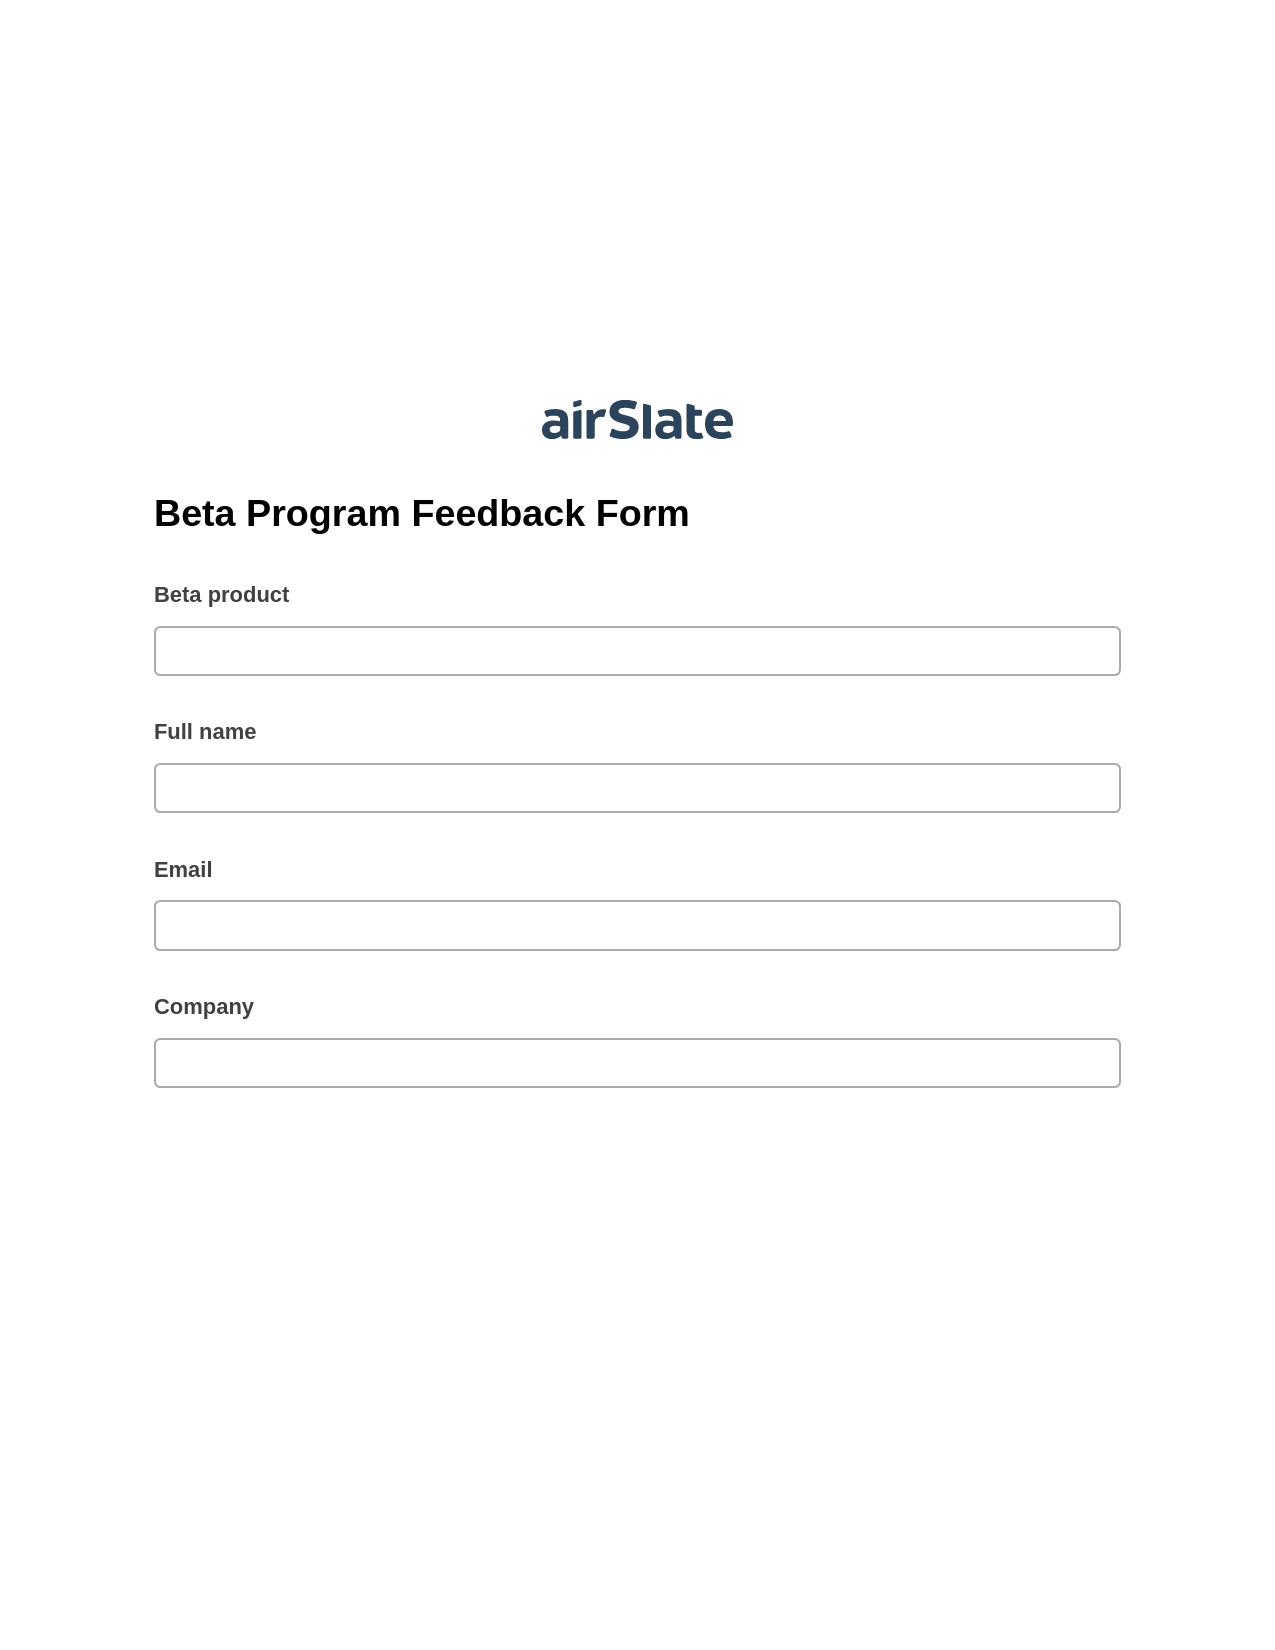 Multirole Beta Program Feedback Form Pre-fill from NetSuite Records Bot, Hide Signatures Bot, OneDrive Bot